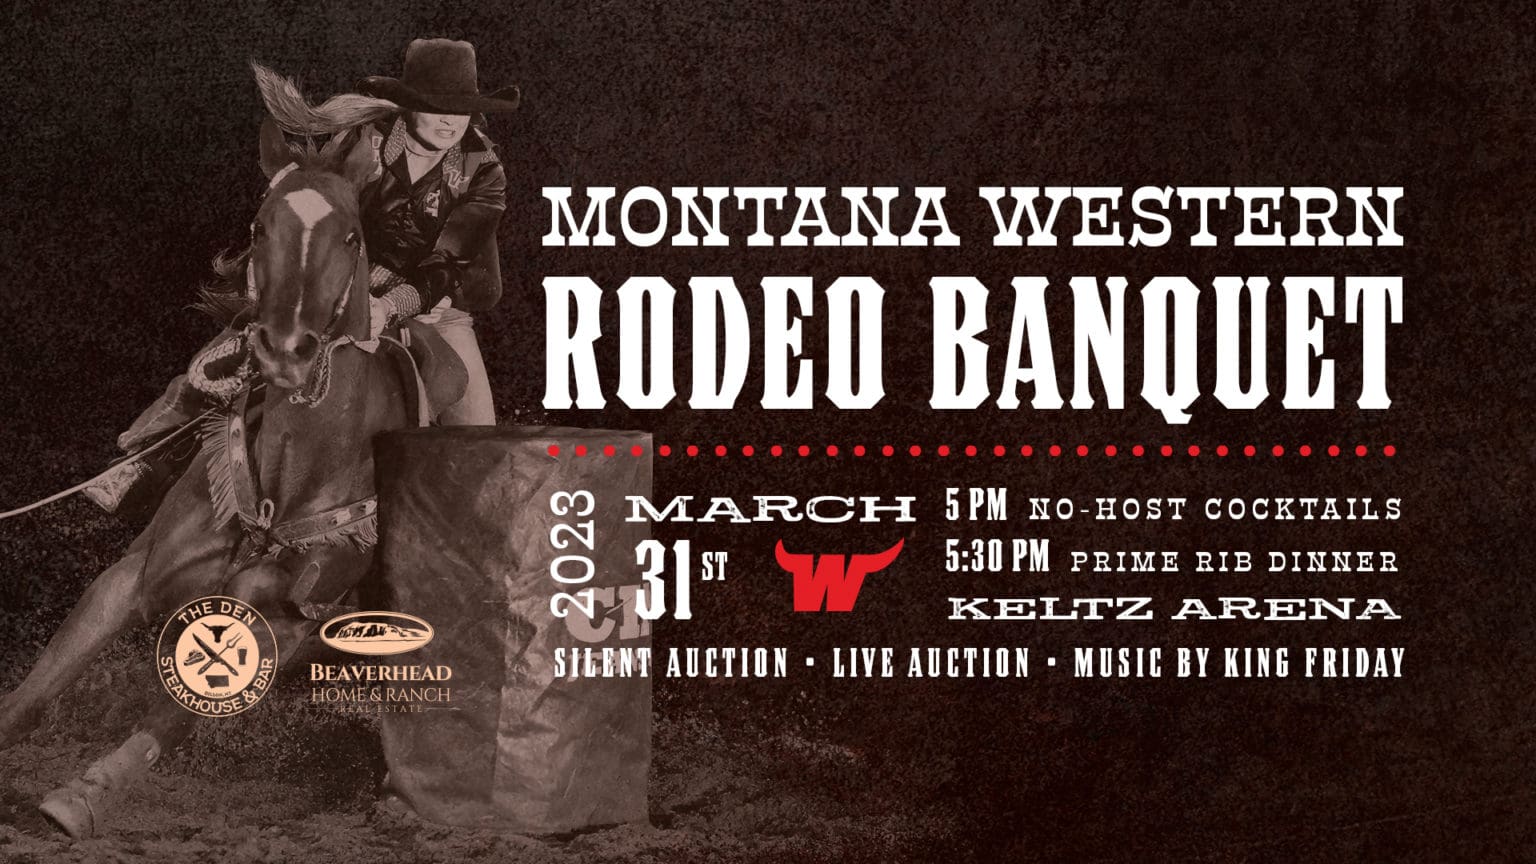 Montana Western 53rd Annual Rodeo Banquet University of Montana Western